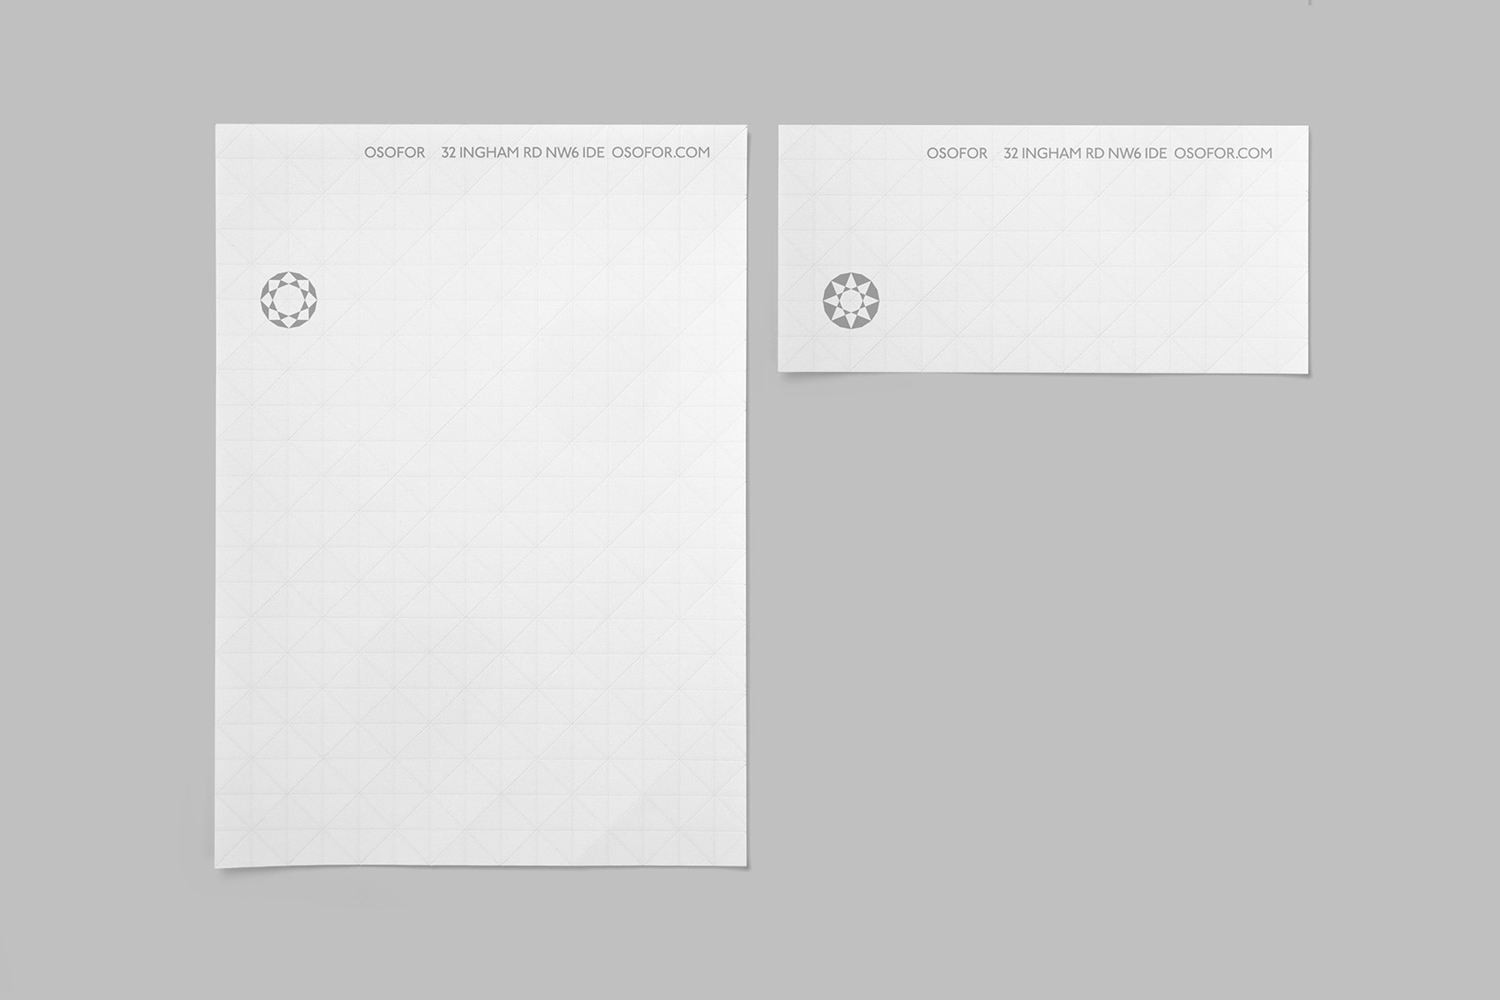 Logo design and stationery by Paul Belford Ltd. for lab diamond business Osofor